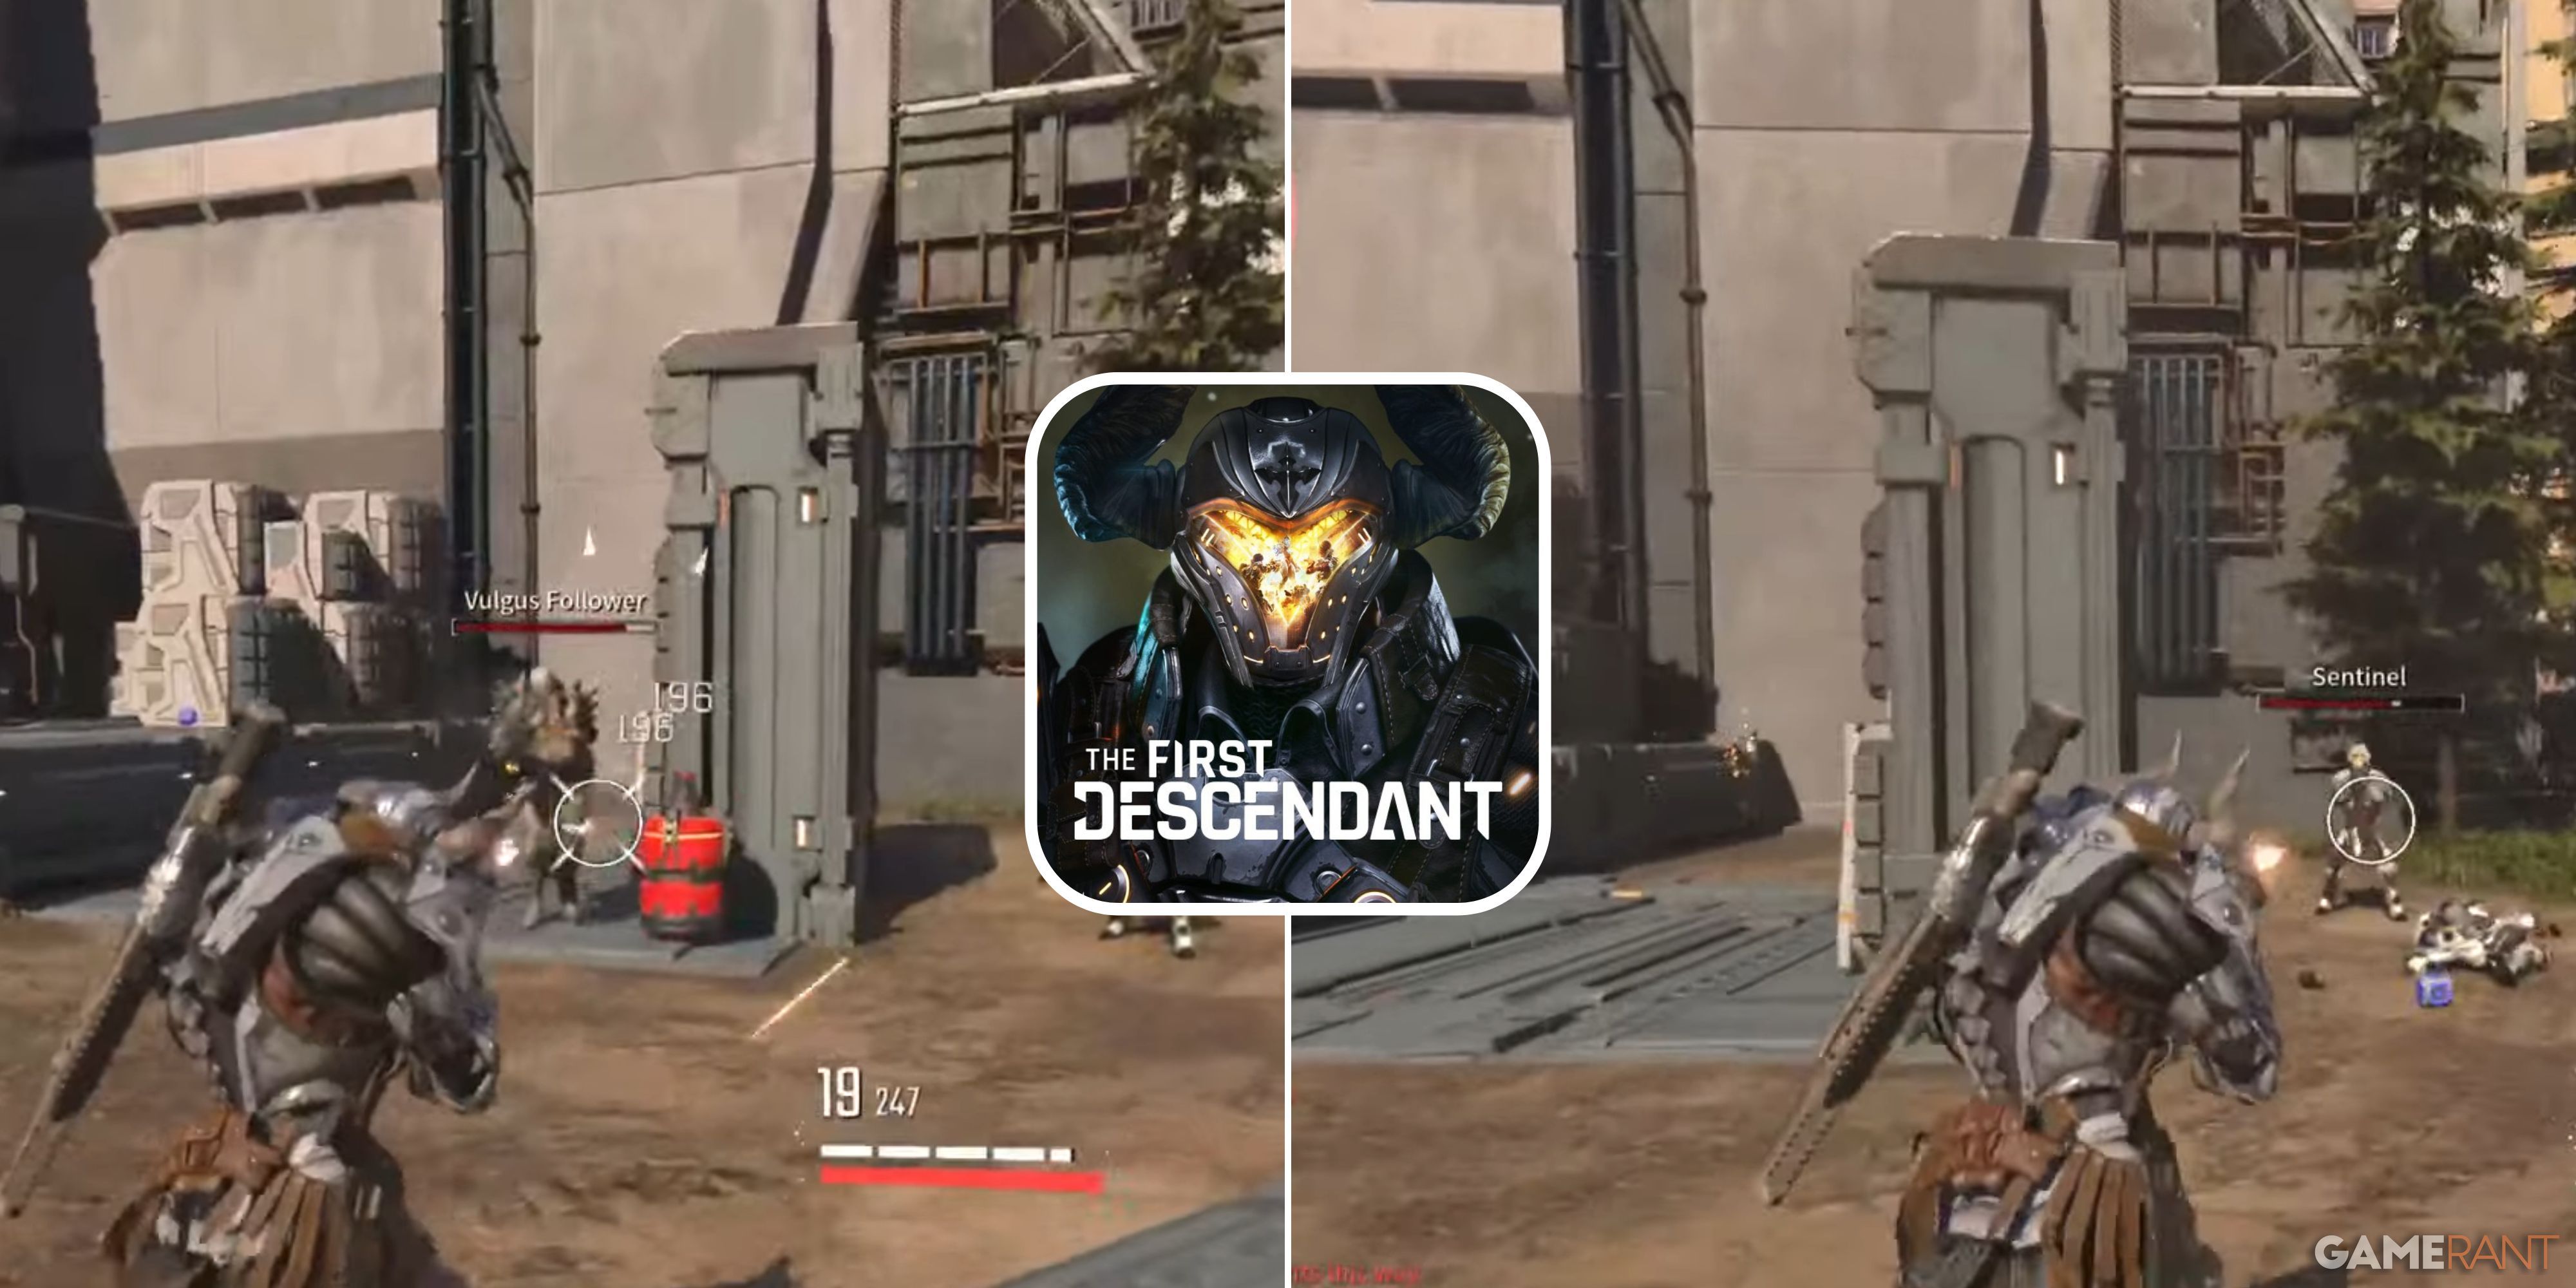 Aiming Feature for First Descendant